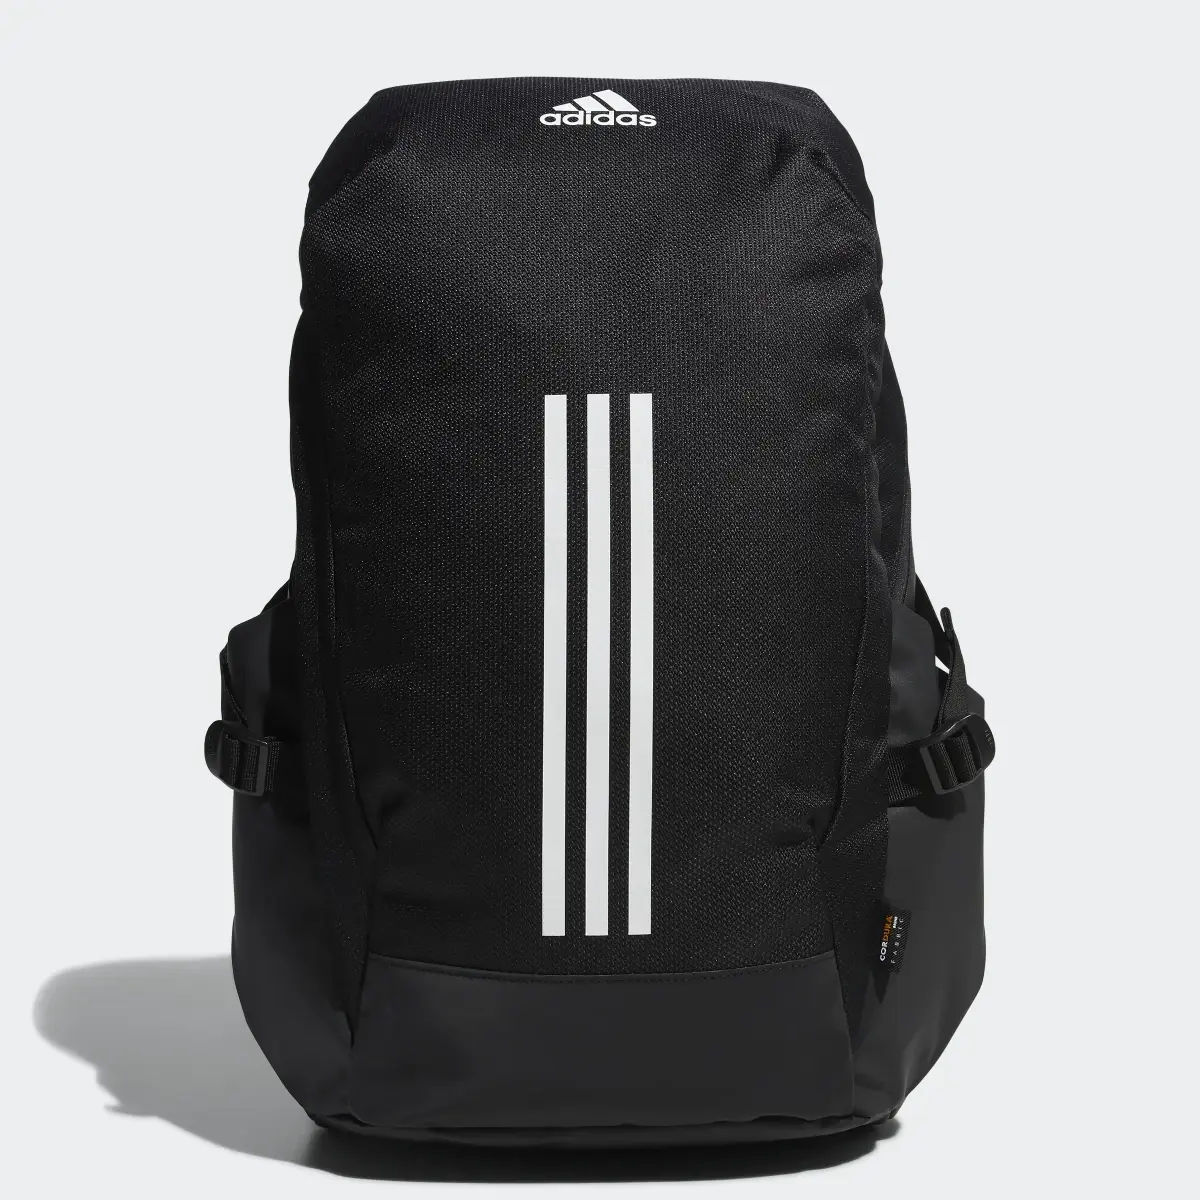 Adidas Endurance Packing System Backpack. 1